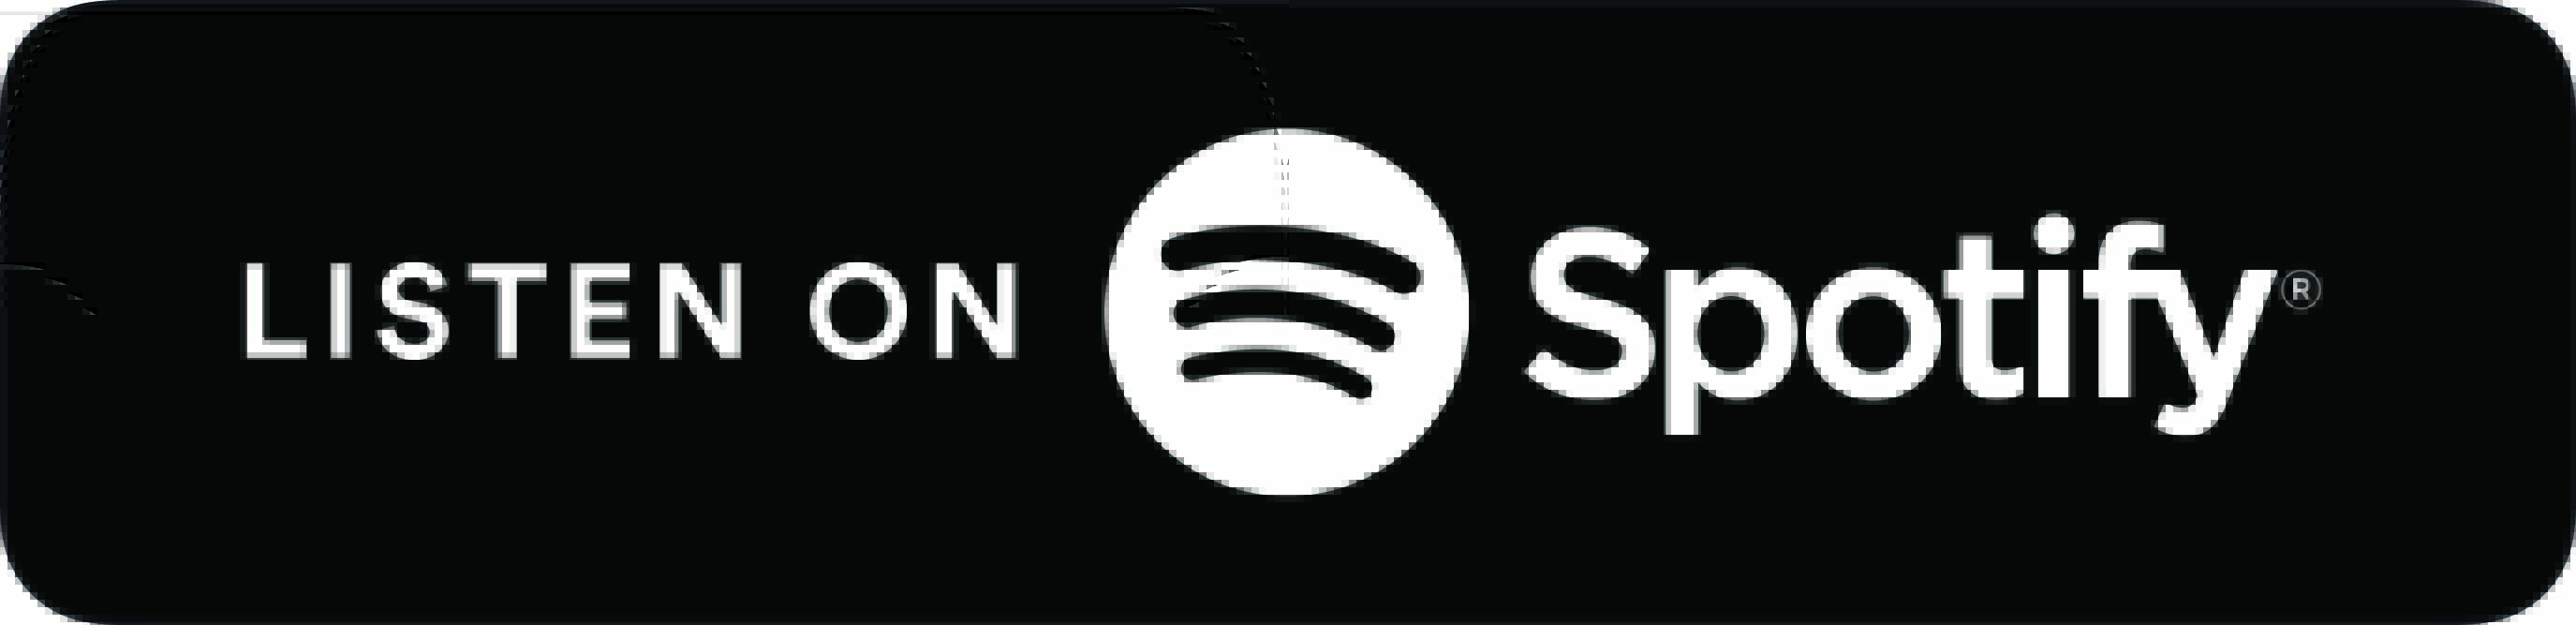 Liston to Quality Podcasts on Spotify now!